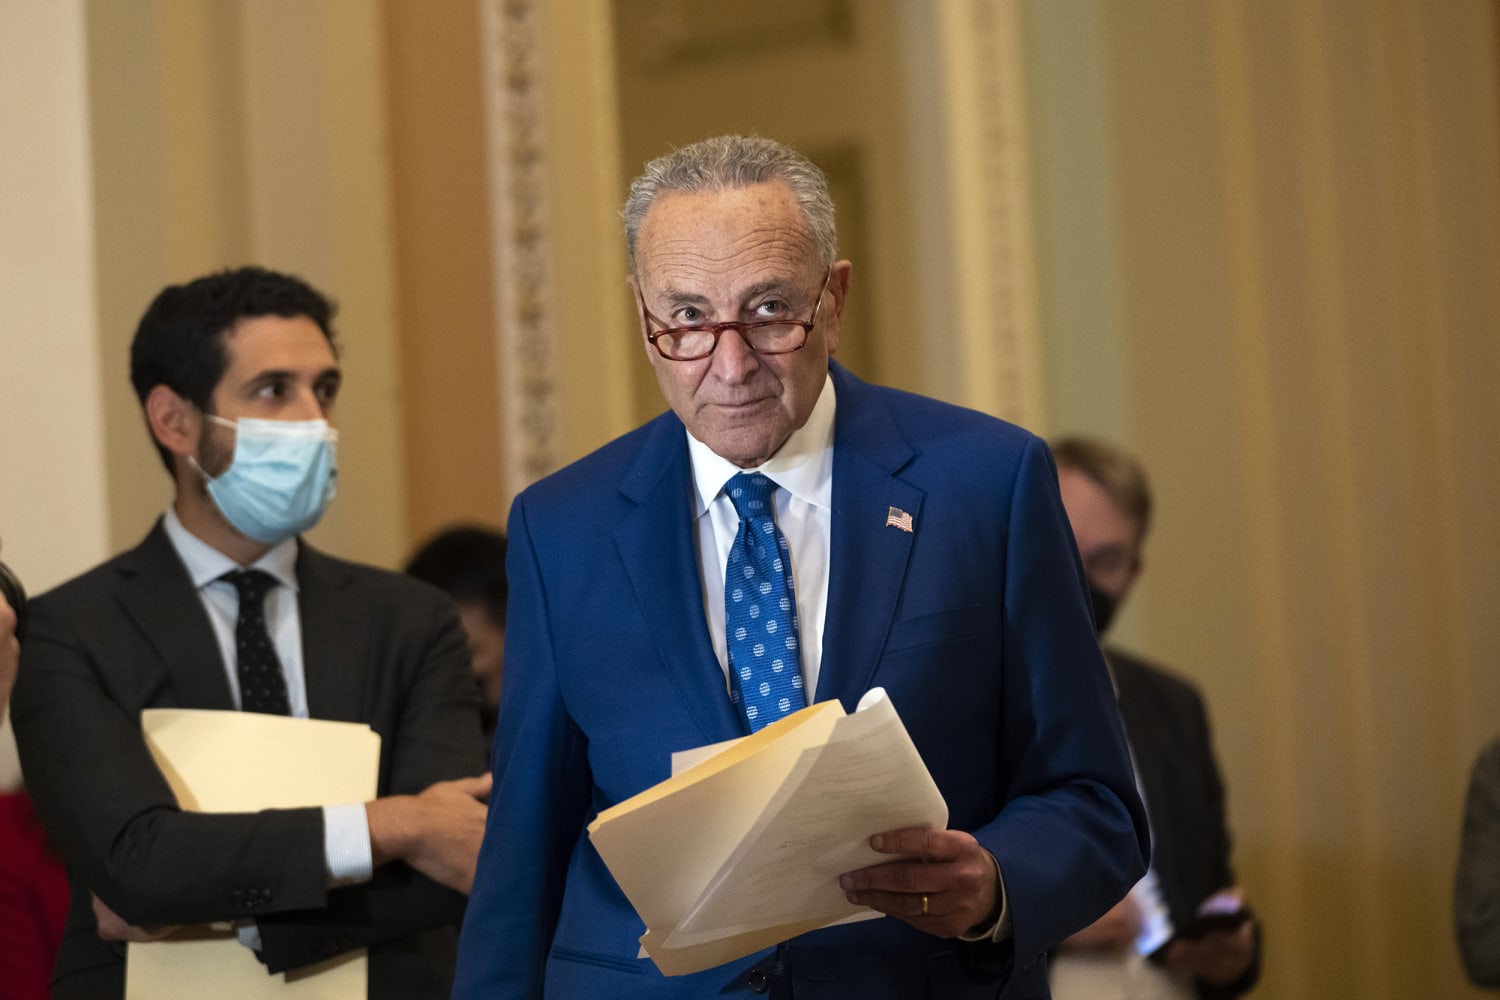 Democrats-rebrand-massive-safety-net-bill-in-face-of-inflation-attacks